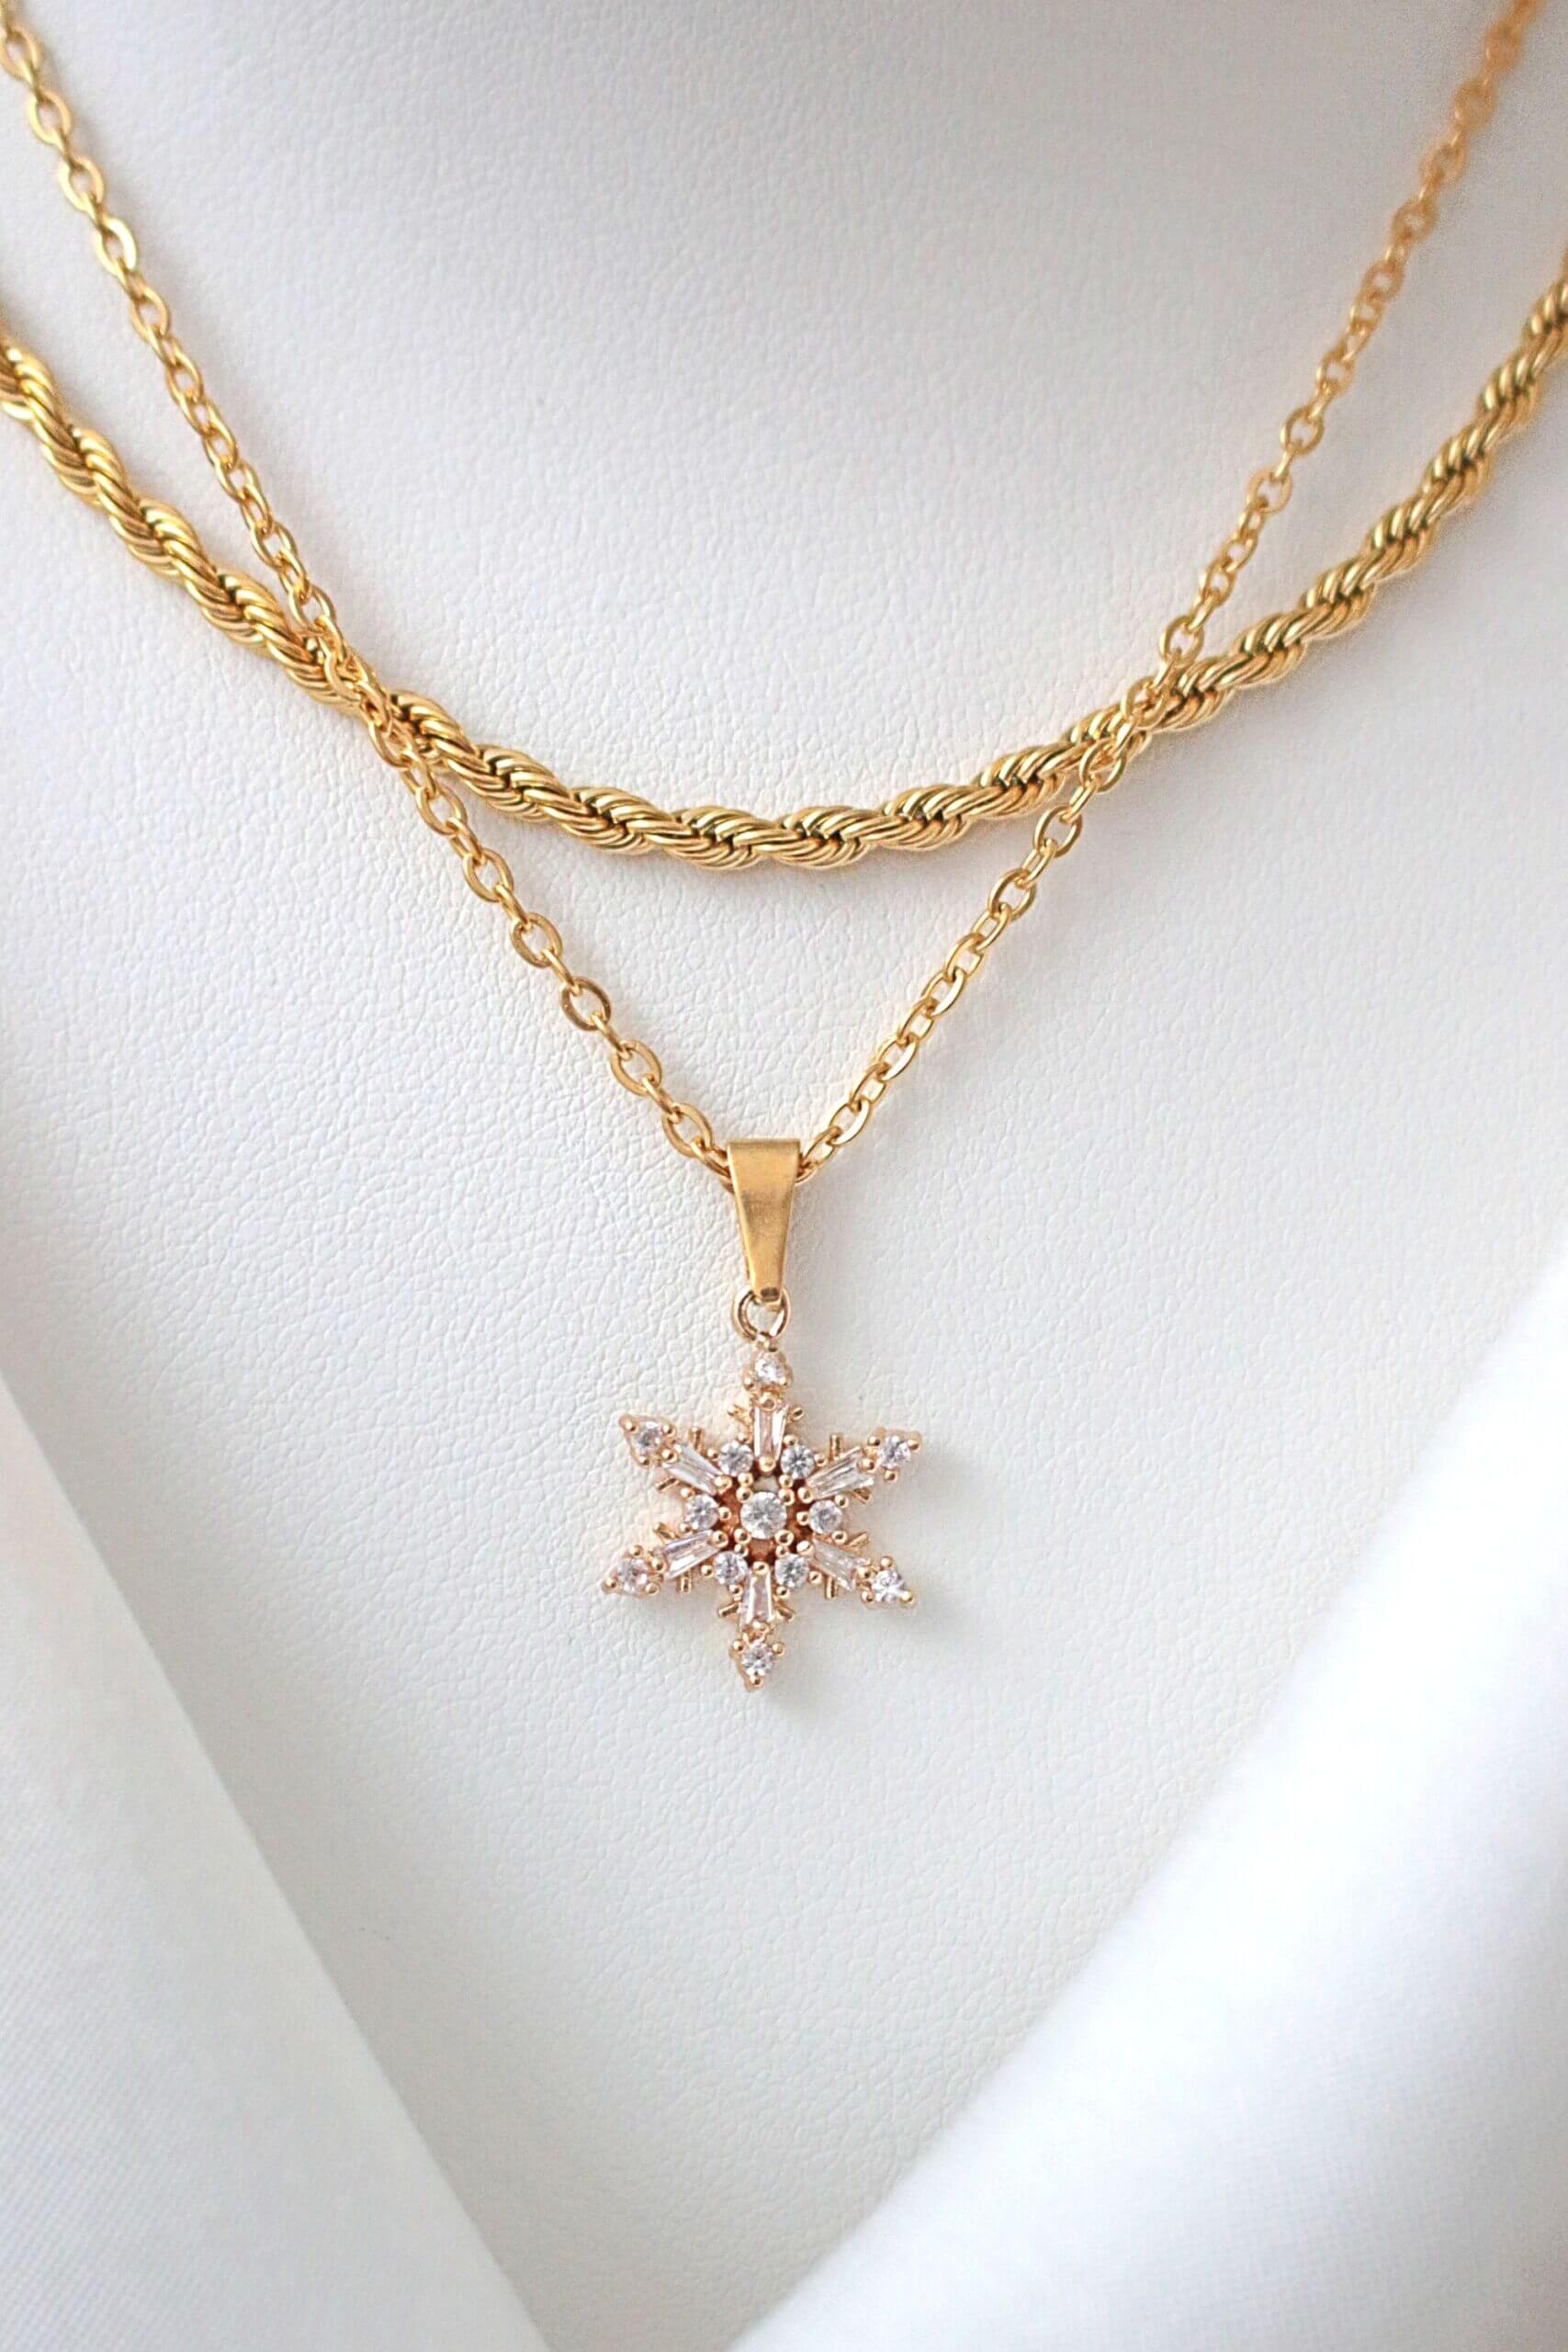 Gold Plated Snowflake Necklace - Dainty and Hypoallergenic Pendant with Cubic Zirconia Stones for Winter Aesthetics Bijou Her